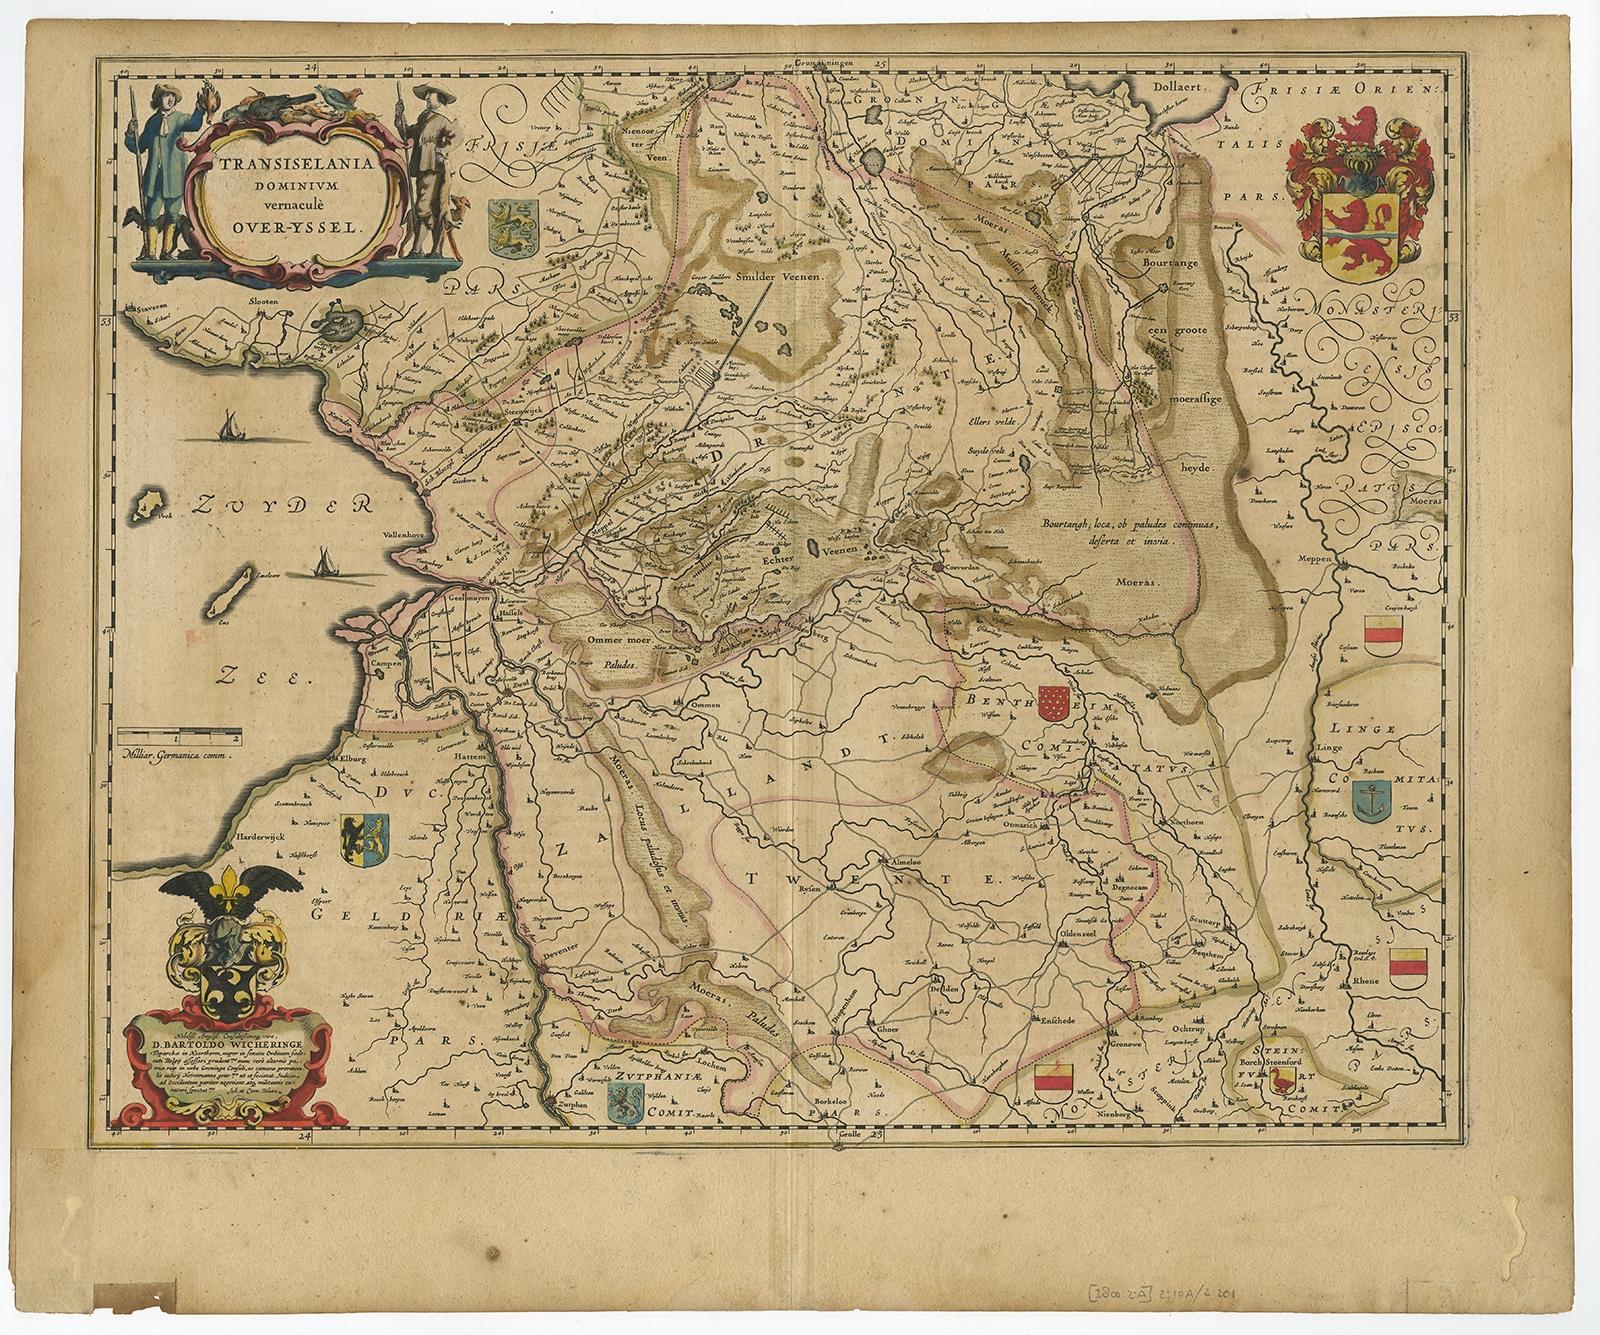 Antique map titled 'Transiselania Dominium vernacule Over-Yssel.' - Map of the Dutch Provinces of Overijssel and Drenthe. Dedicated to Mr. Bartold Wicheringe by Joan and Cornelis Blaeu. With many coats of arms and two beautiful cartouches. Source